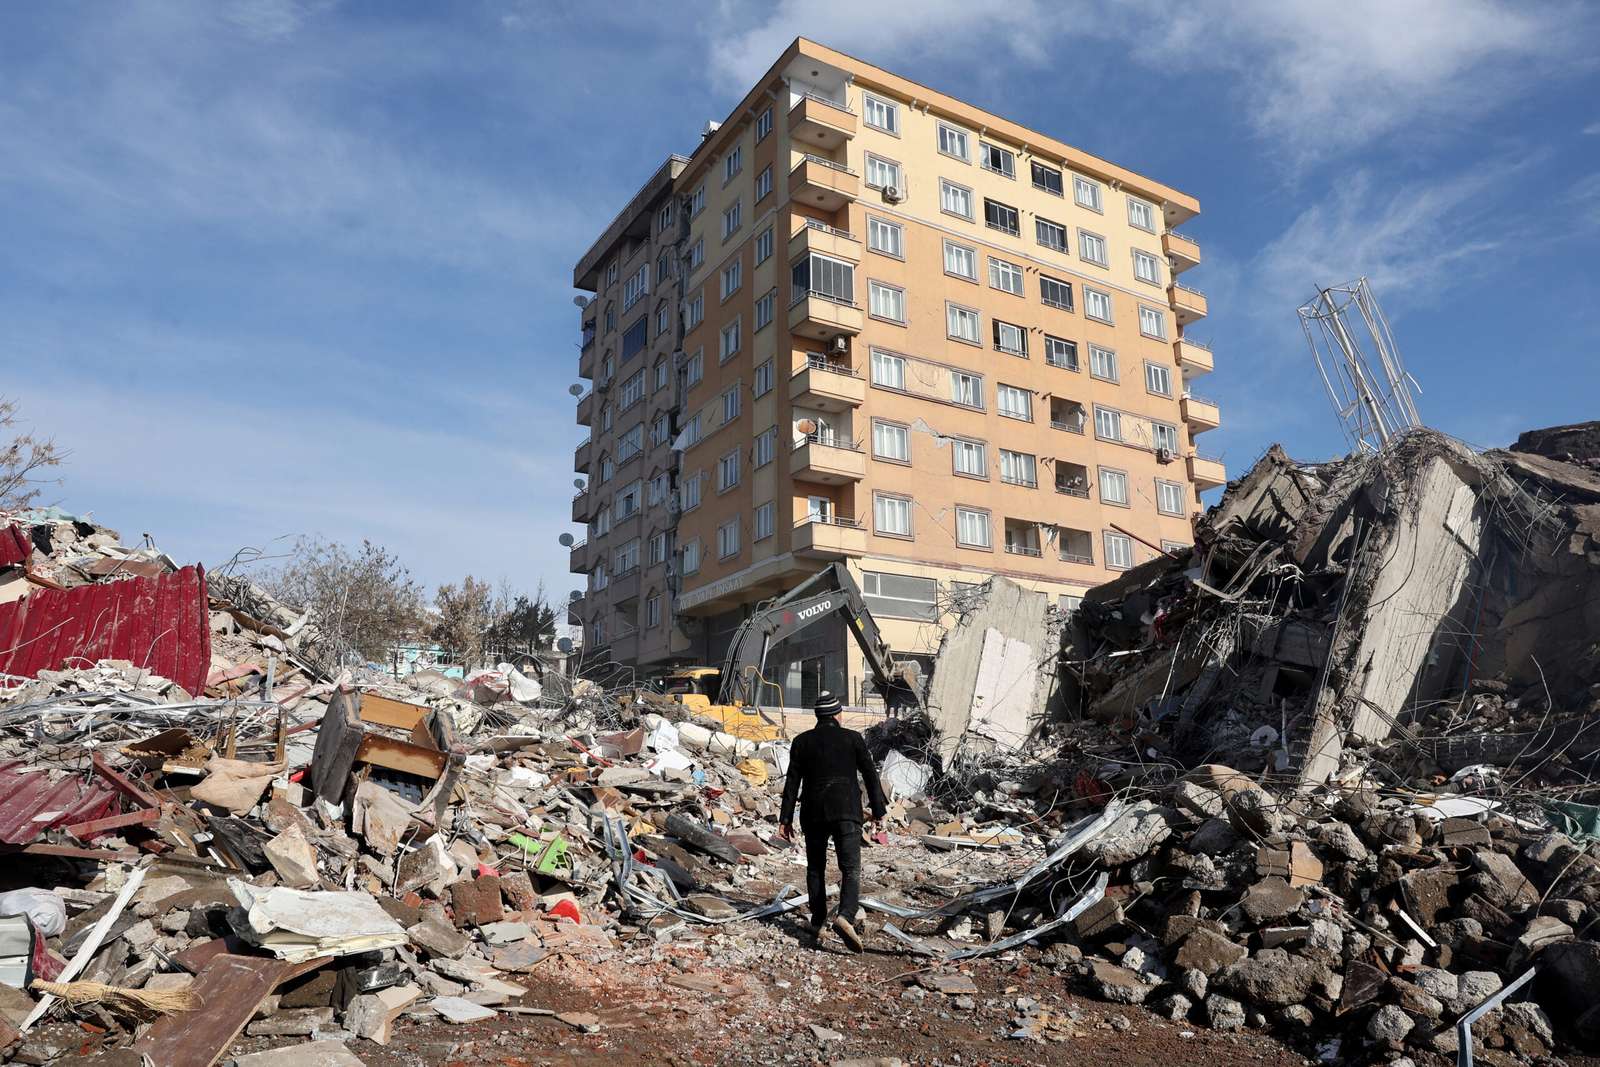 A man walks across the rubble of collapsed building towards a building still standing s in Kahramanmaras, close to the quake's epicentre, the day after a 7.8-magnitude earthquake struck the country's southeast, on February 7, 2023. - Rescuers in Turkey and Syria braved frigid weather, aftershocks and collapsing buildings, as they dug for survivors buried by an earthquake that killed more than 5,000 people. Some of the heaviest devastation occurred near the quake's epicentre between Kahramanmaras and Gaziantep, a city of two million where entire blocks now lie in ruins under gathering snow. (Photo by Adem ALTAN / AFP)